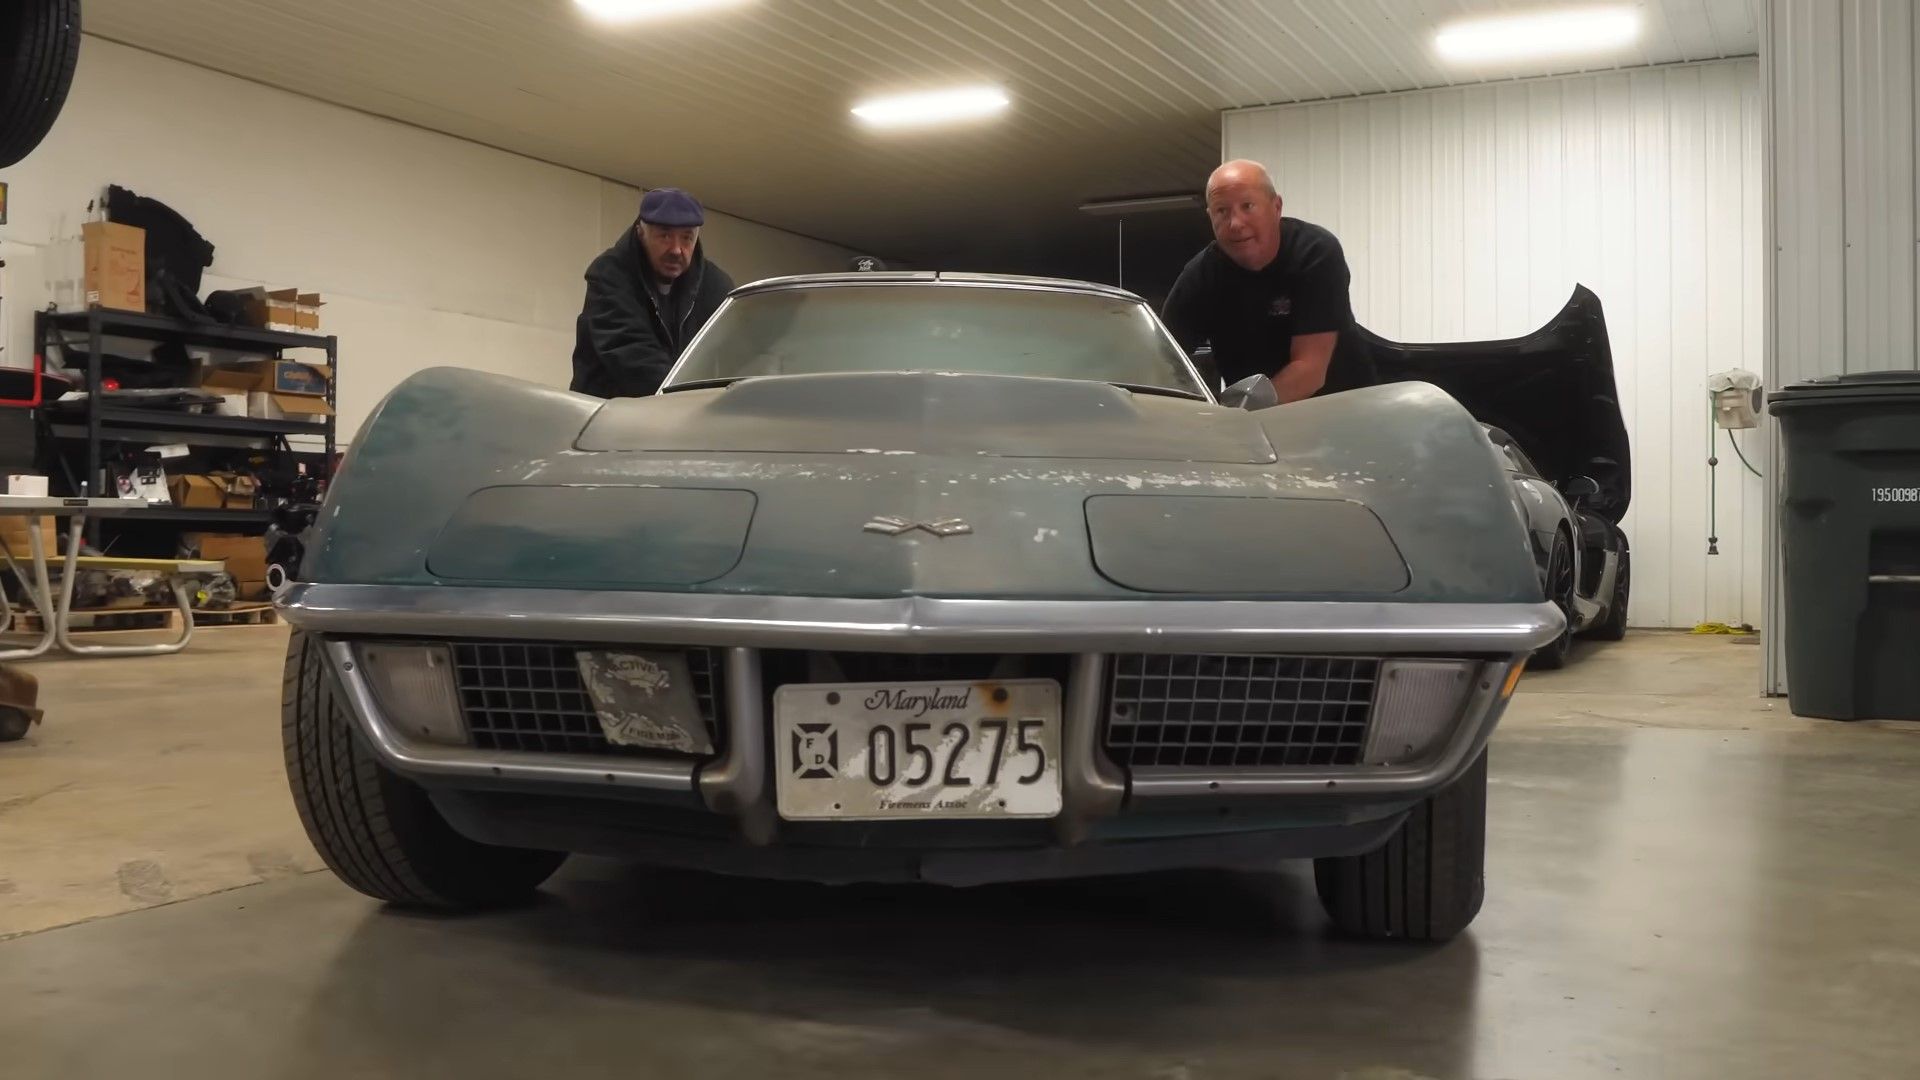 What Makes Dennis Collins' Latest 1971 Chevy Corvette Find So Incredibly Rare